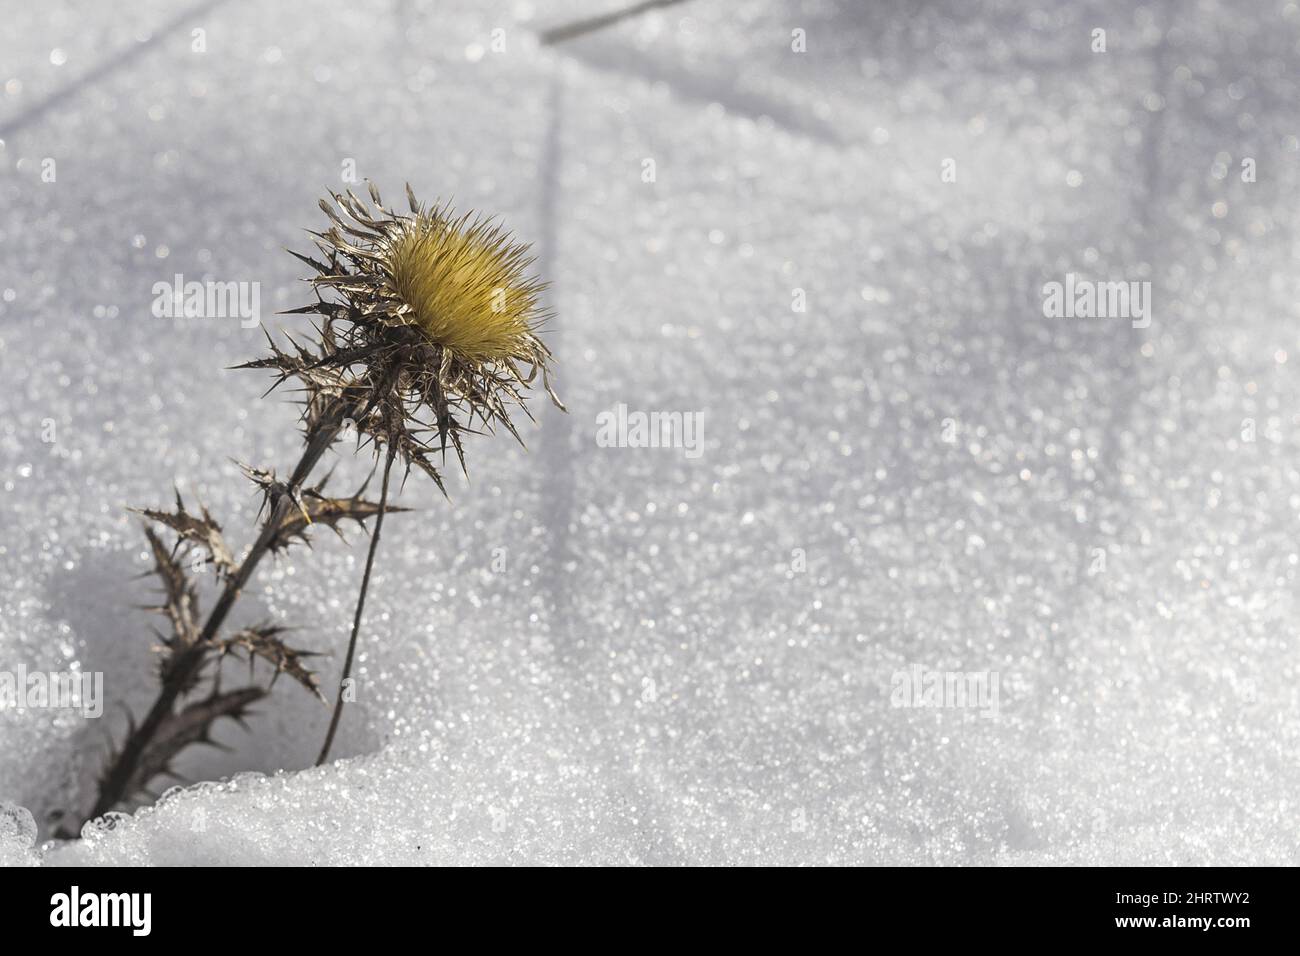 Closeup of a carline thistle in the snow Stock Photo